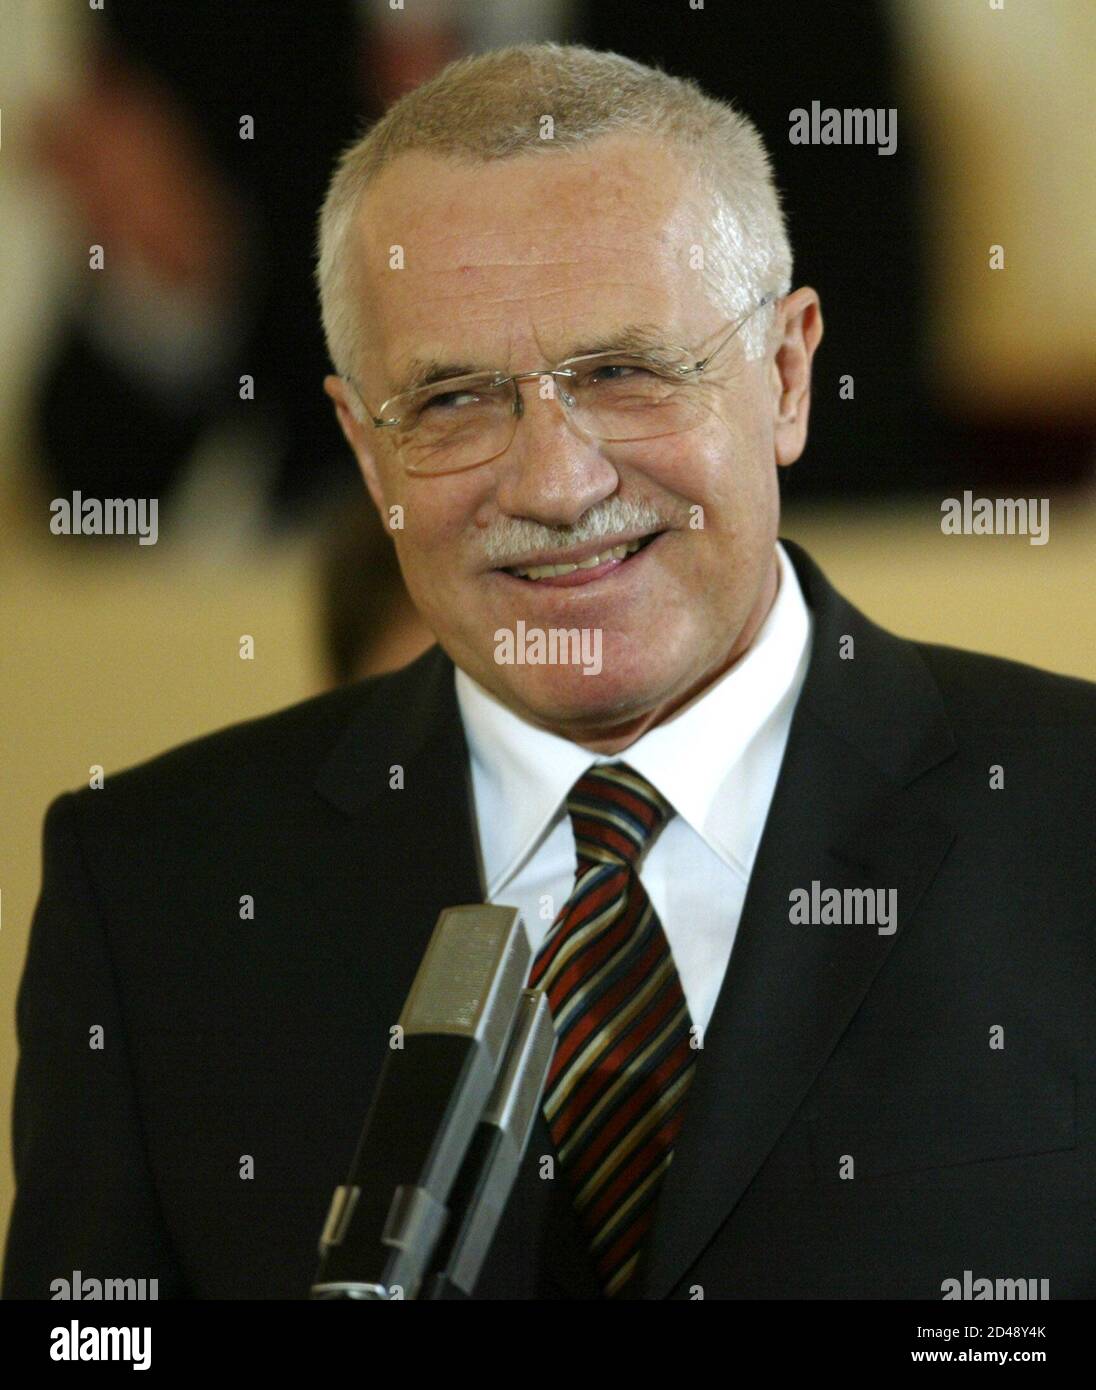 Former right-wing Czech Prime Minister Vaclav Klaus smiles during his speech at the parlimentary session in the Spanish Hall at Prague Castle January 24, 2003. Czech lawmakers began on Friday their second attempt at electing a successor to President Vaclav Havel, but the battle to replace East Europe's elder statesman is likely to collapse once again amid political wrangling.  REUTERS/Petr Josek REUTERS Stock Photo